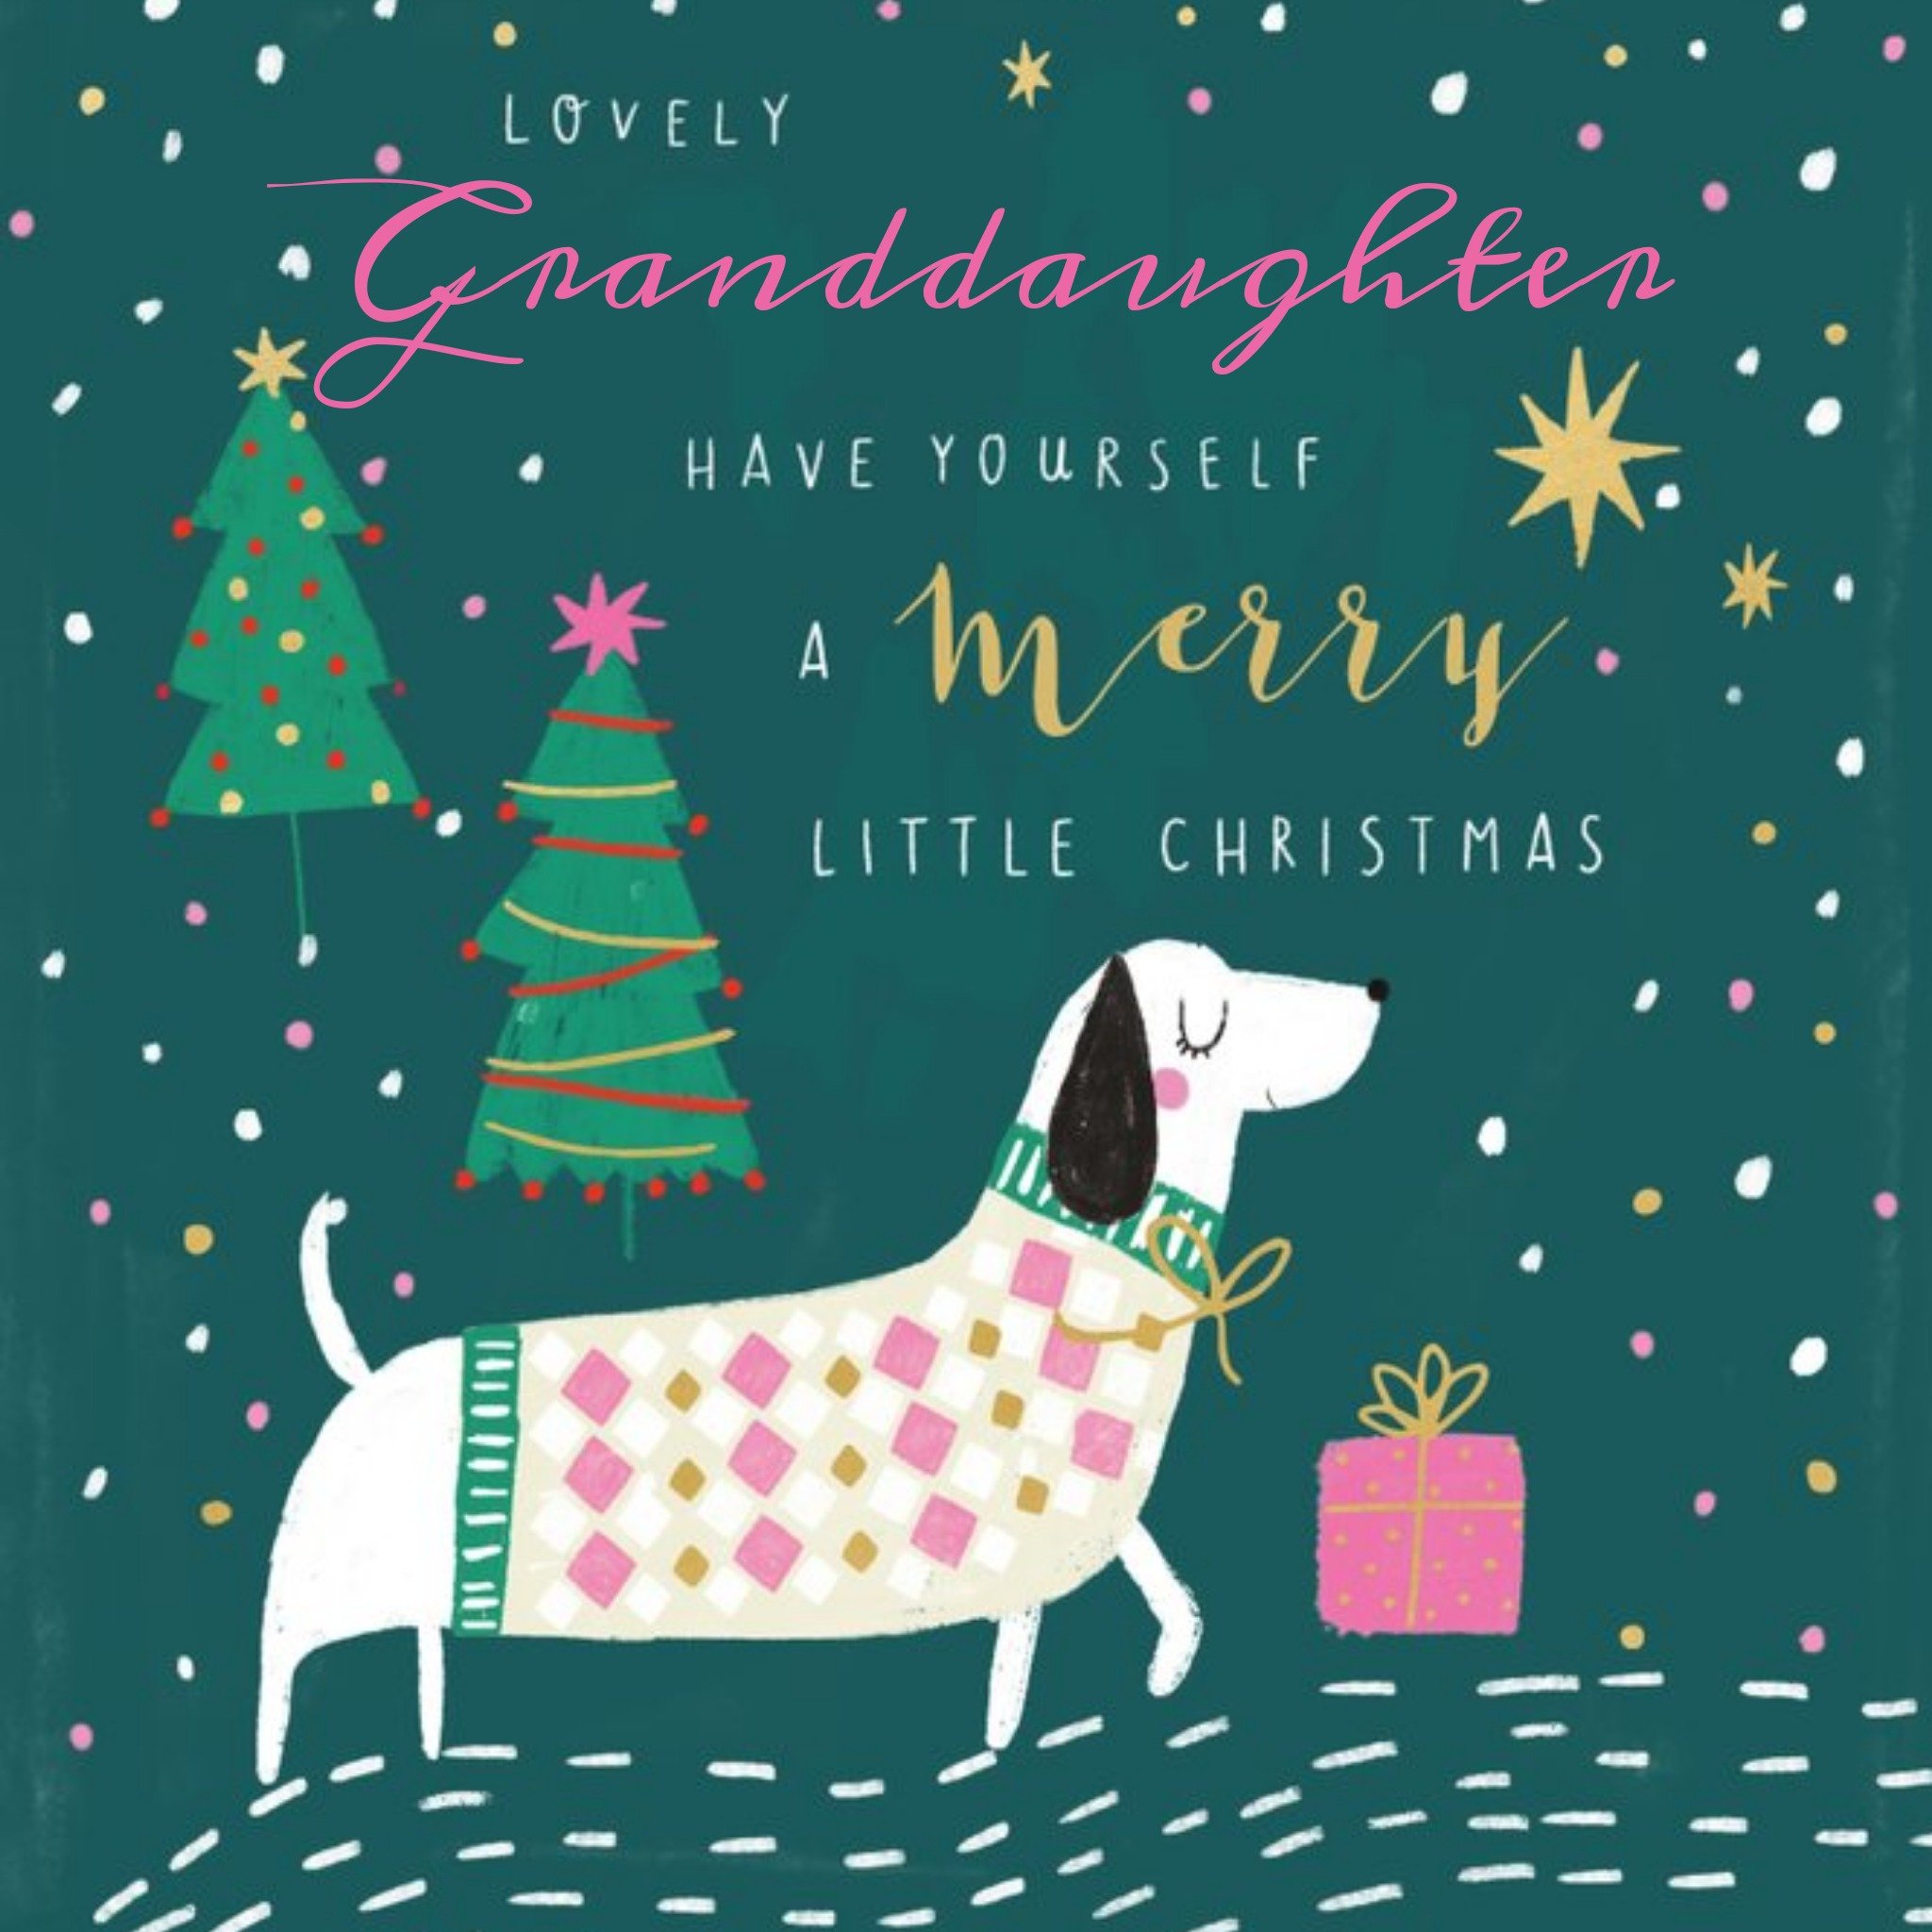 Moonpig Pigment Cute Dog Lovely Granddaughter Christmas Card, Large